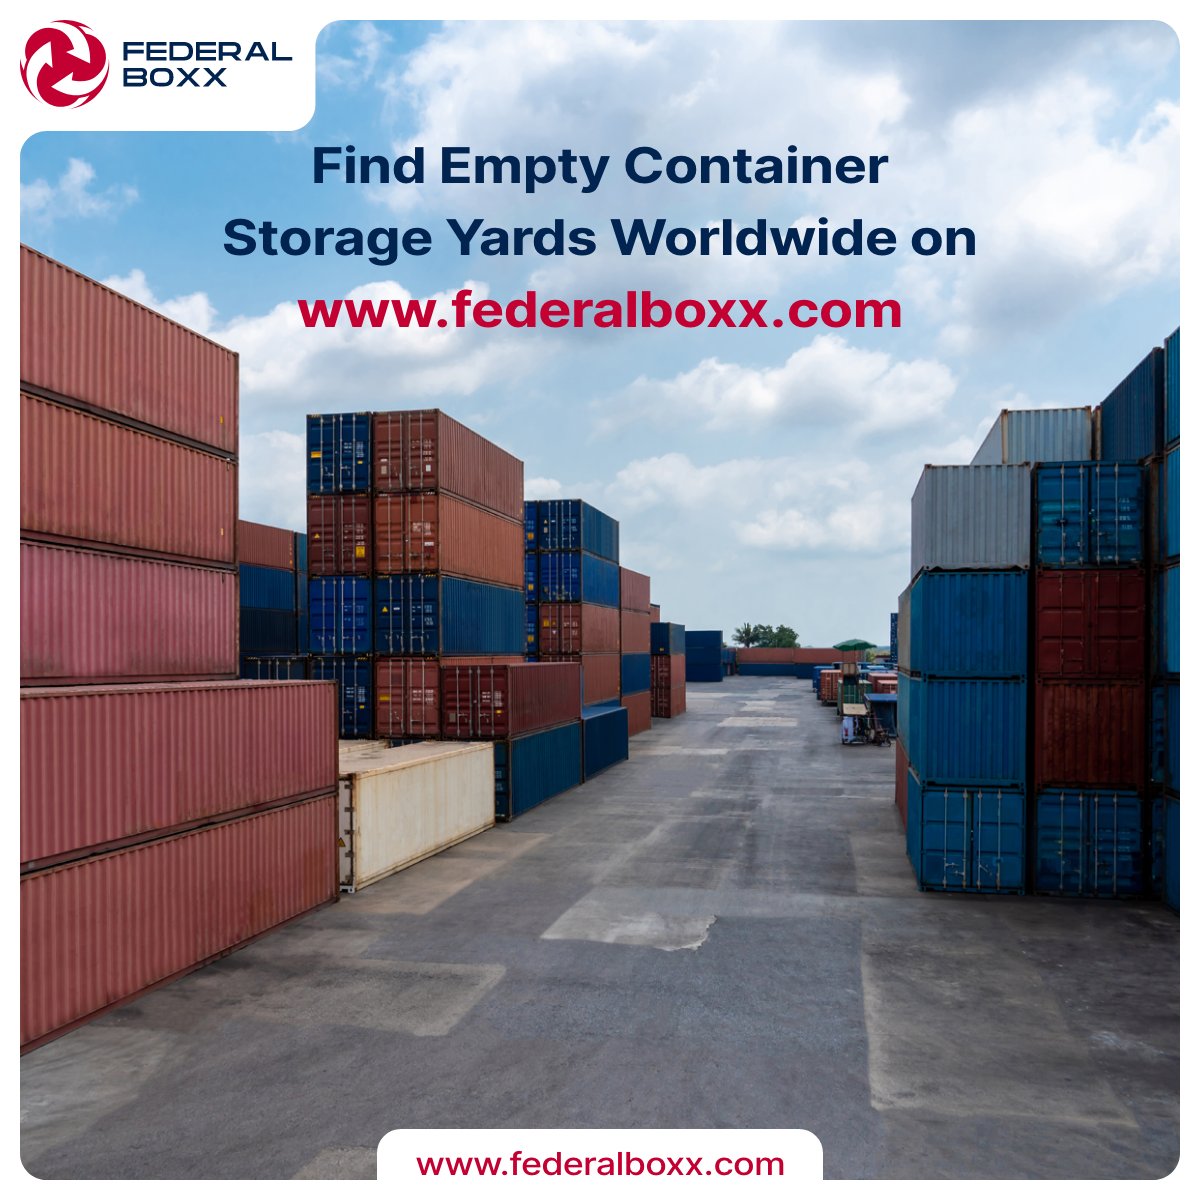 With FederalBoxx, locating empty container storage yards worldwide is effortless. Our platform connects you to a global network of yards, ensuring you find the storage solution you need, wherever you are. #ContainerStorage #Logistics #GlobalNetwork